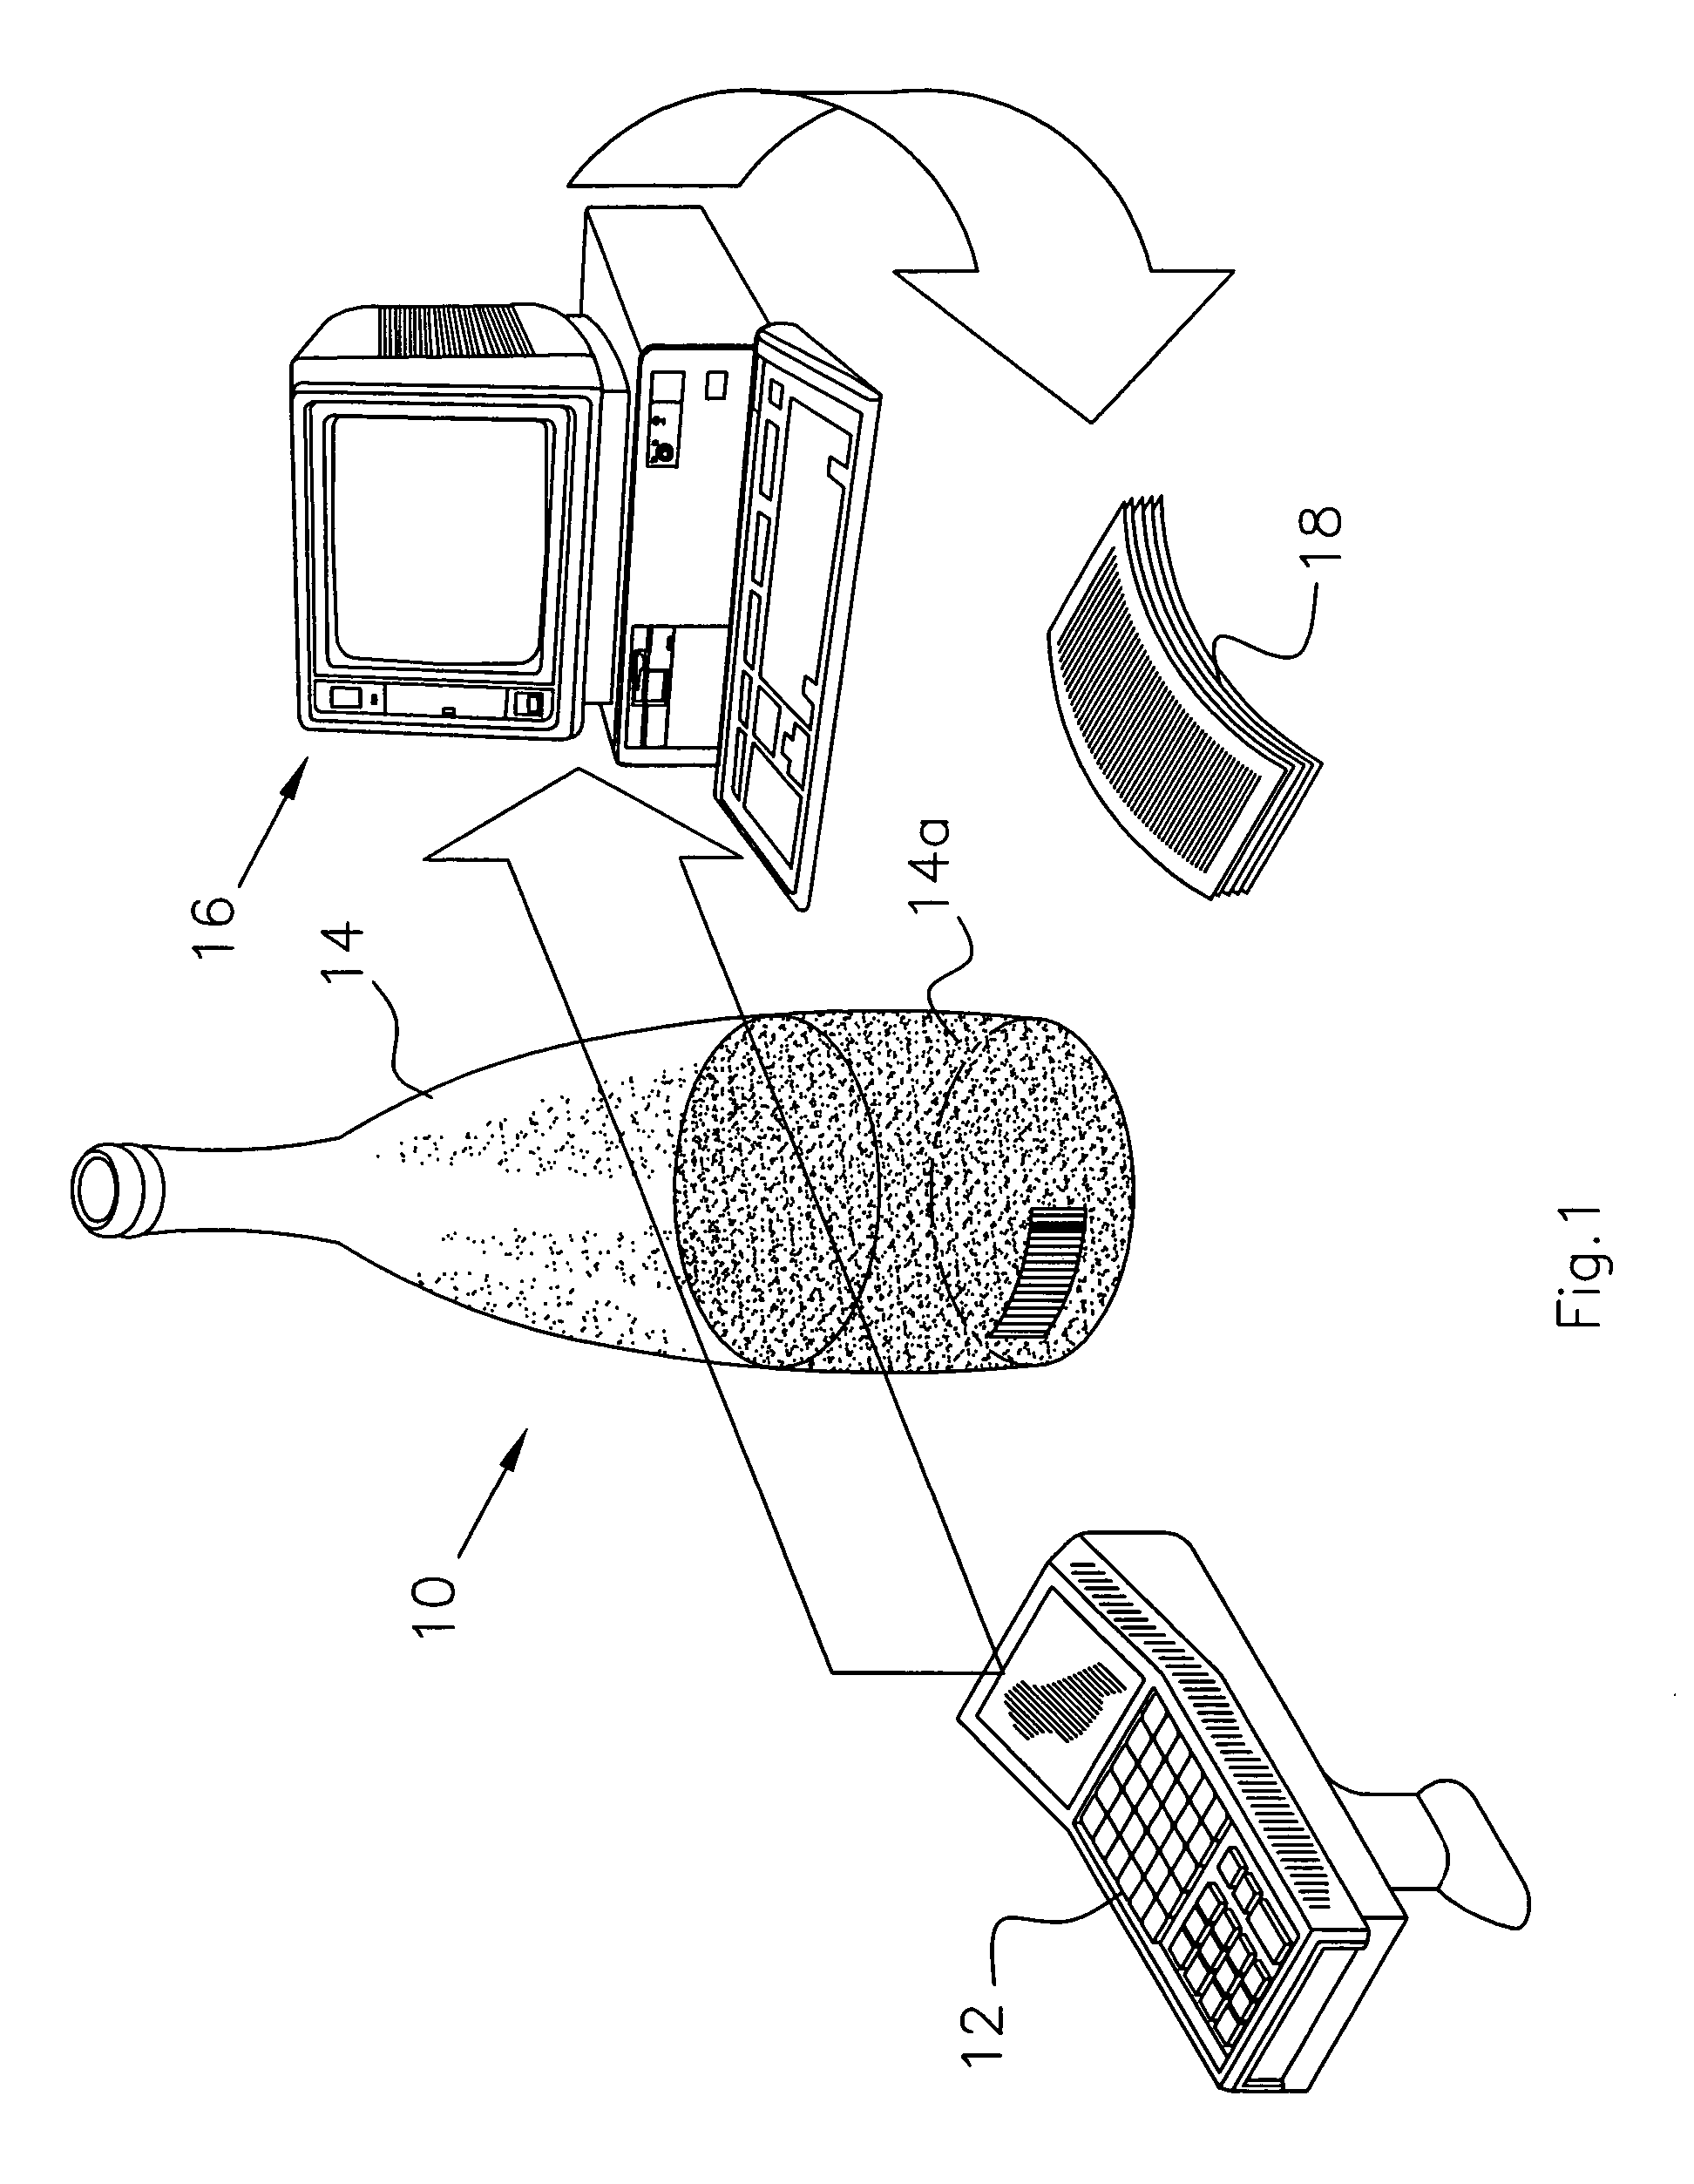 Process for auditing an alcohol beverage inventory